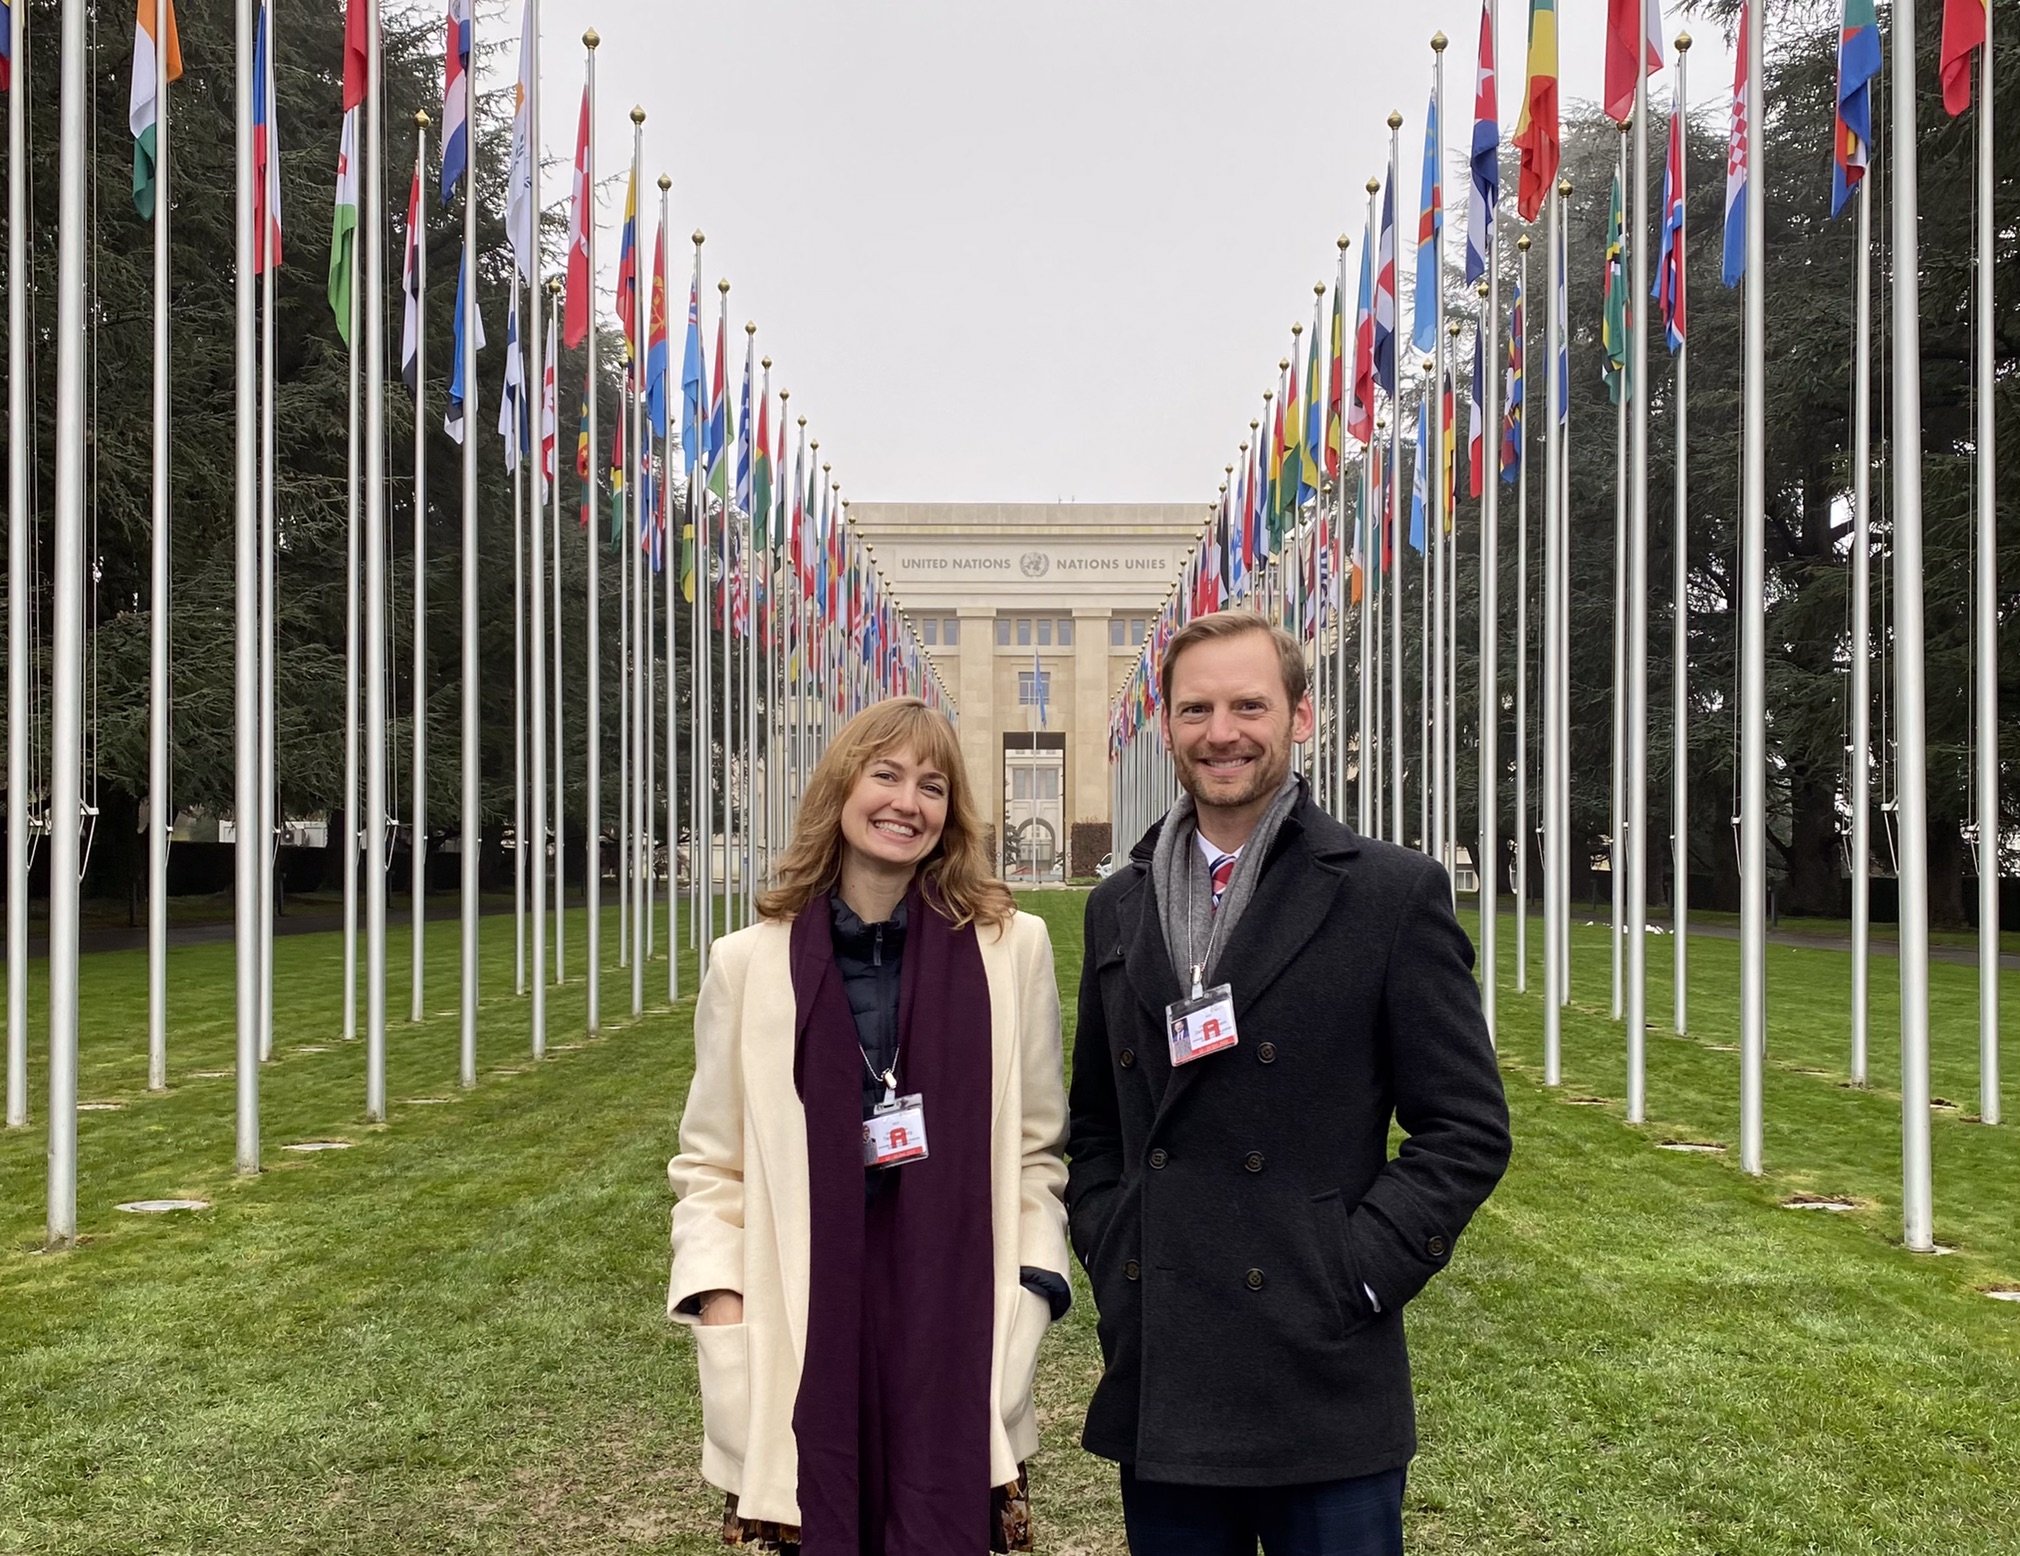 Taylor Hausburg and Zachary Herrmann stand in front of a line of flags at the United Nations headquarters in Geneva